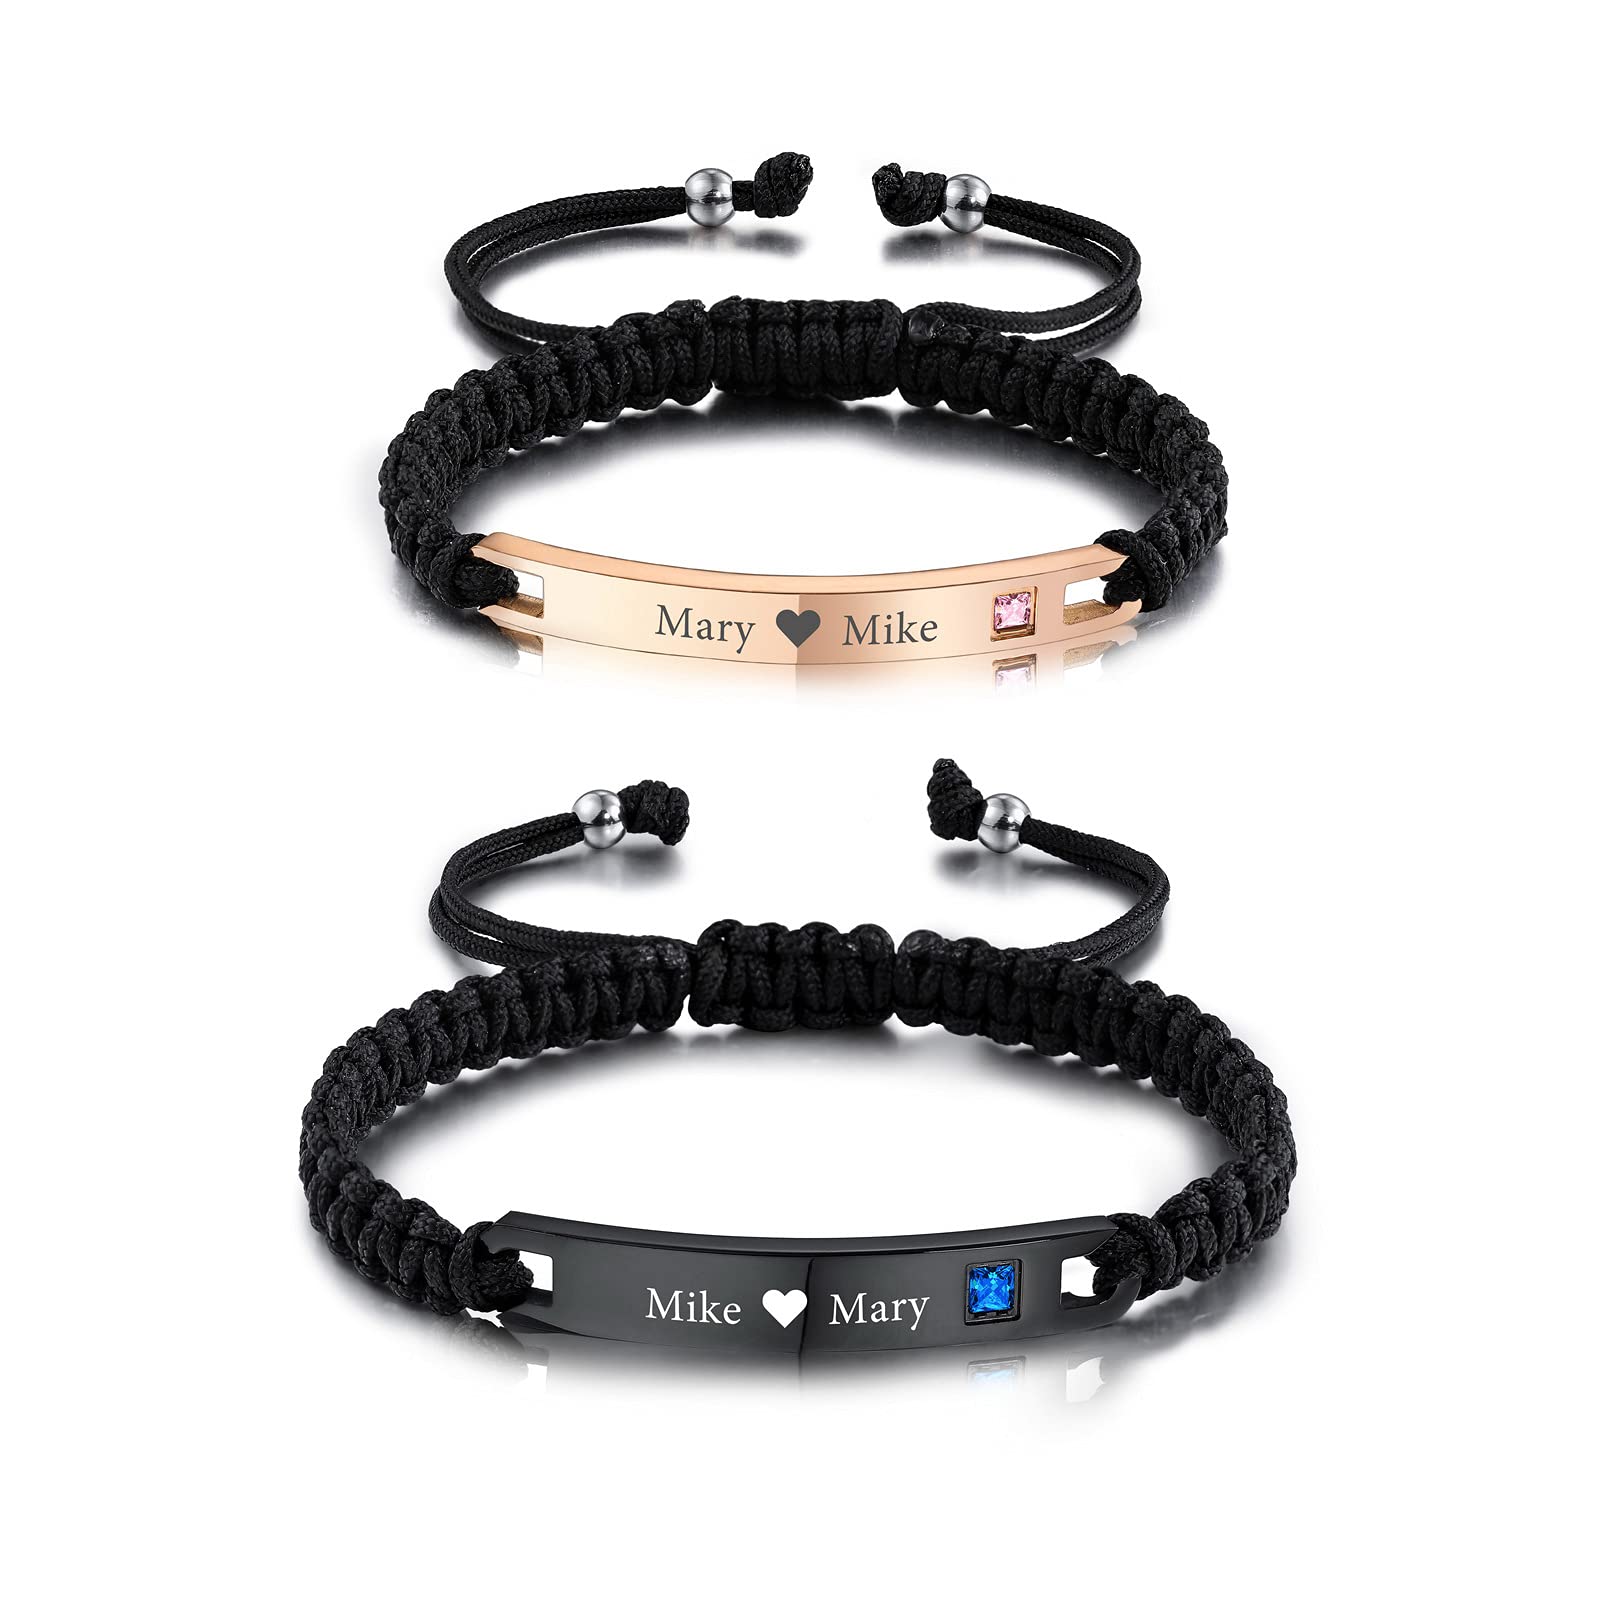 INBLUE Customized Braided Rope Bracelets with Stainless Steel Engraved Plate Birthstones Handmade Adjustable Bracelets Gifts for Women Men Couples Friendship Families